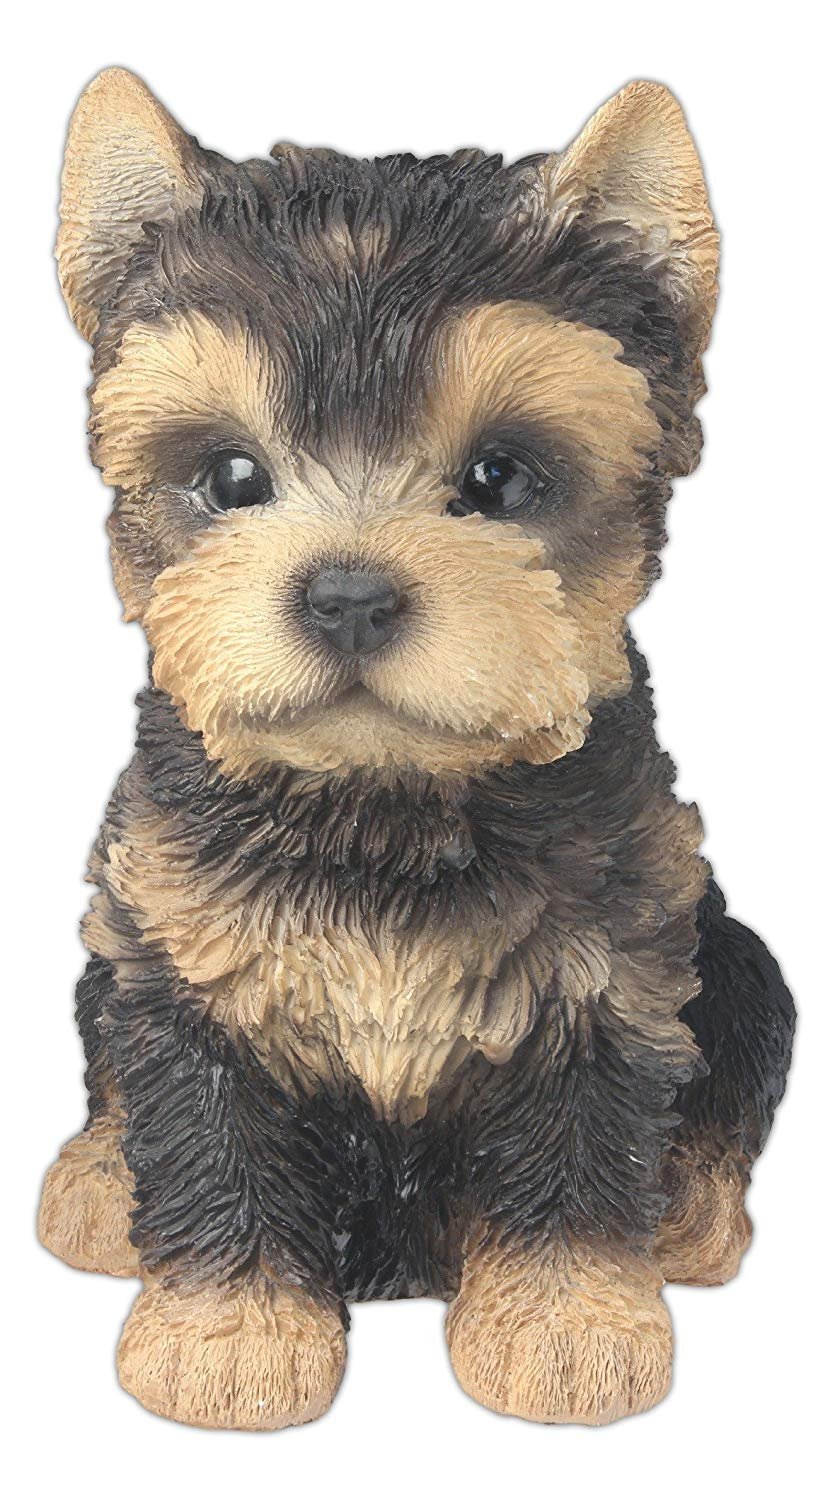 Nature's Gallery "Pet Pals" Statue (Yorkshire Terrier Puppy)